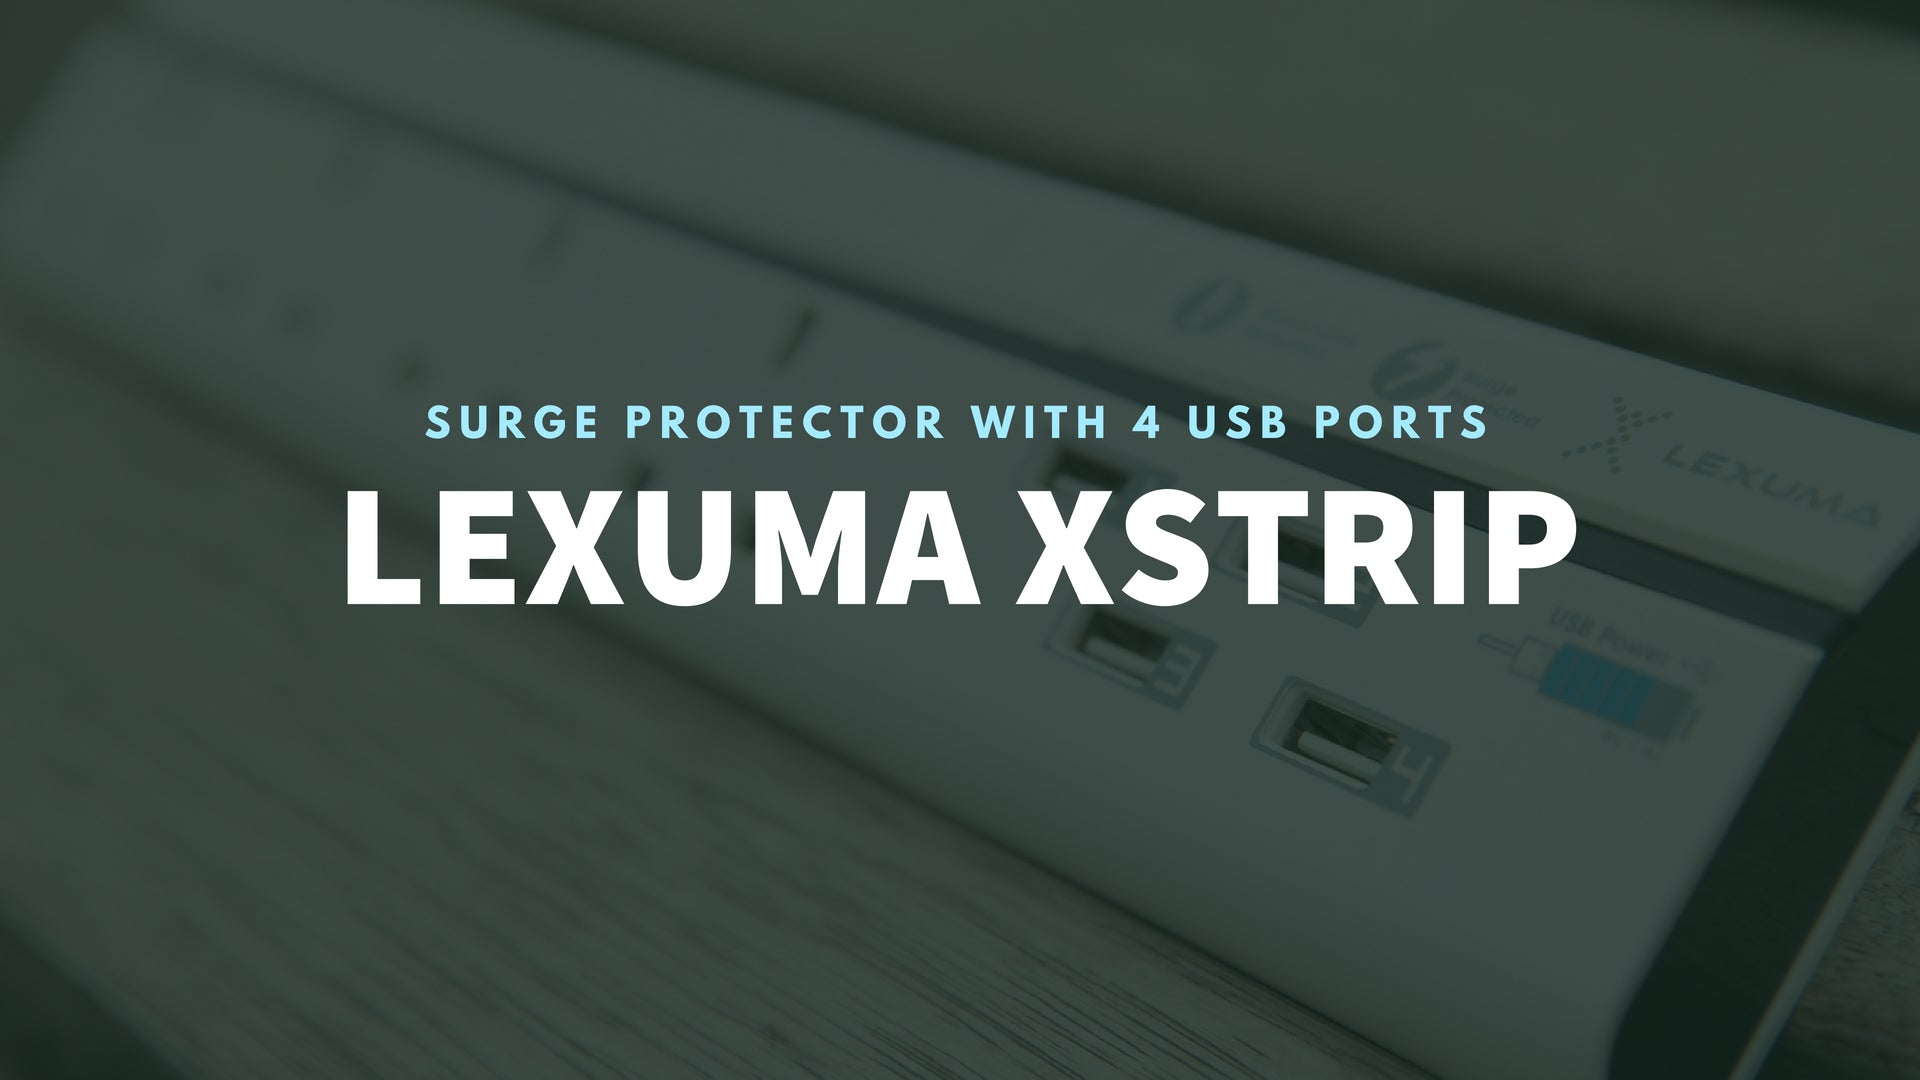 Lexuma 辣數碼 XStrip XPS-S1640 6 socket Gang Surge Protected Power Strip with Smart IC USB Charging Ports universal power strip best smart argos travel extension lead 6 socket energy saving plug energy saving best energy saving worth it stand by electricity smart LED strip homekit strip lgc3 smartthings argos travel power strip vs extension cord review